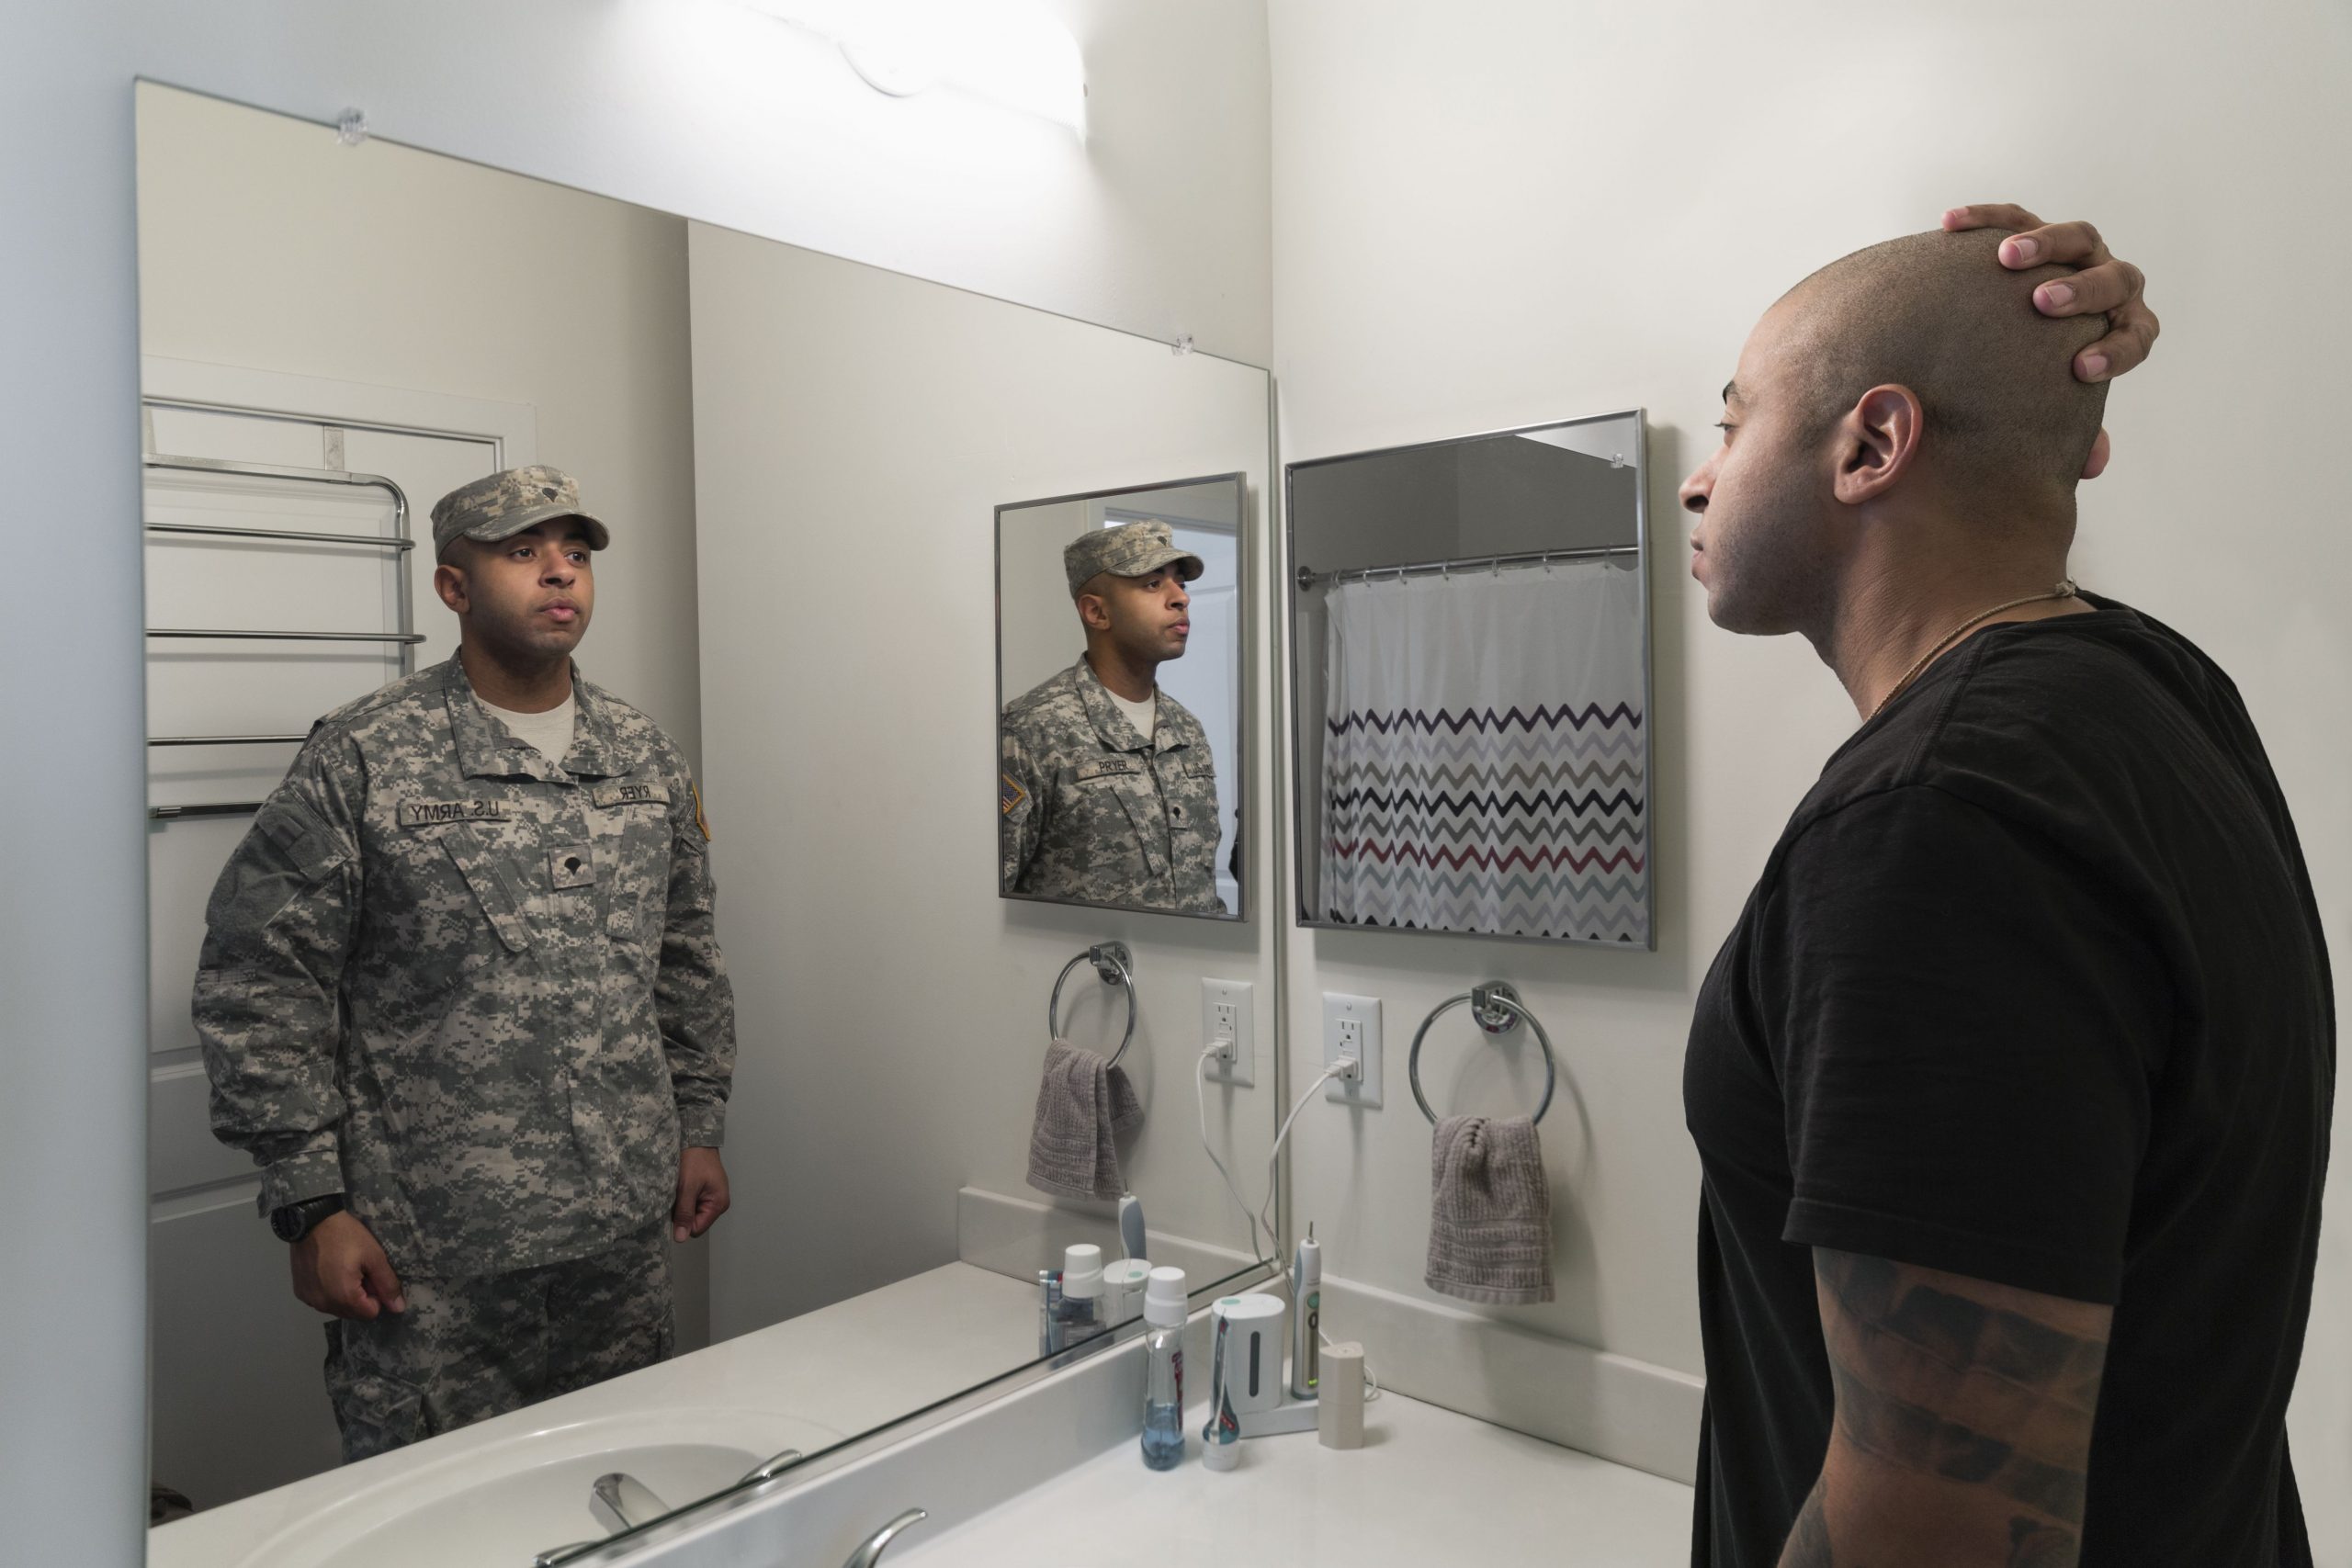 Four Ways to Get an Early Discharge from the Military